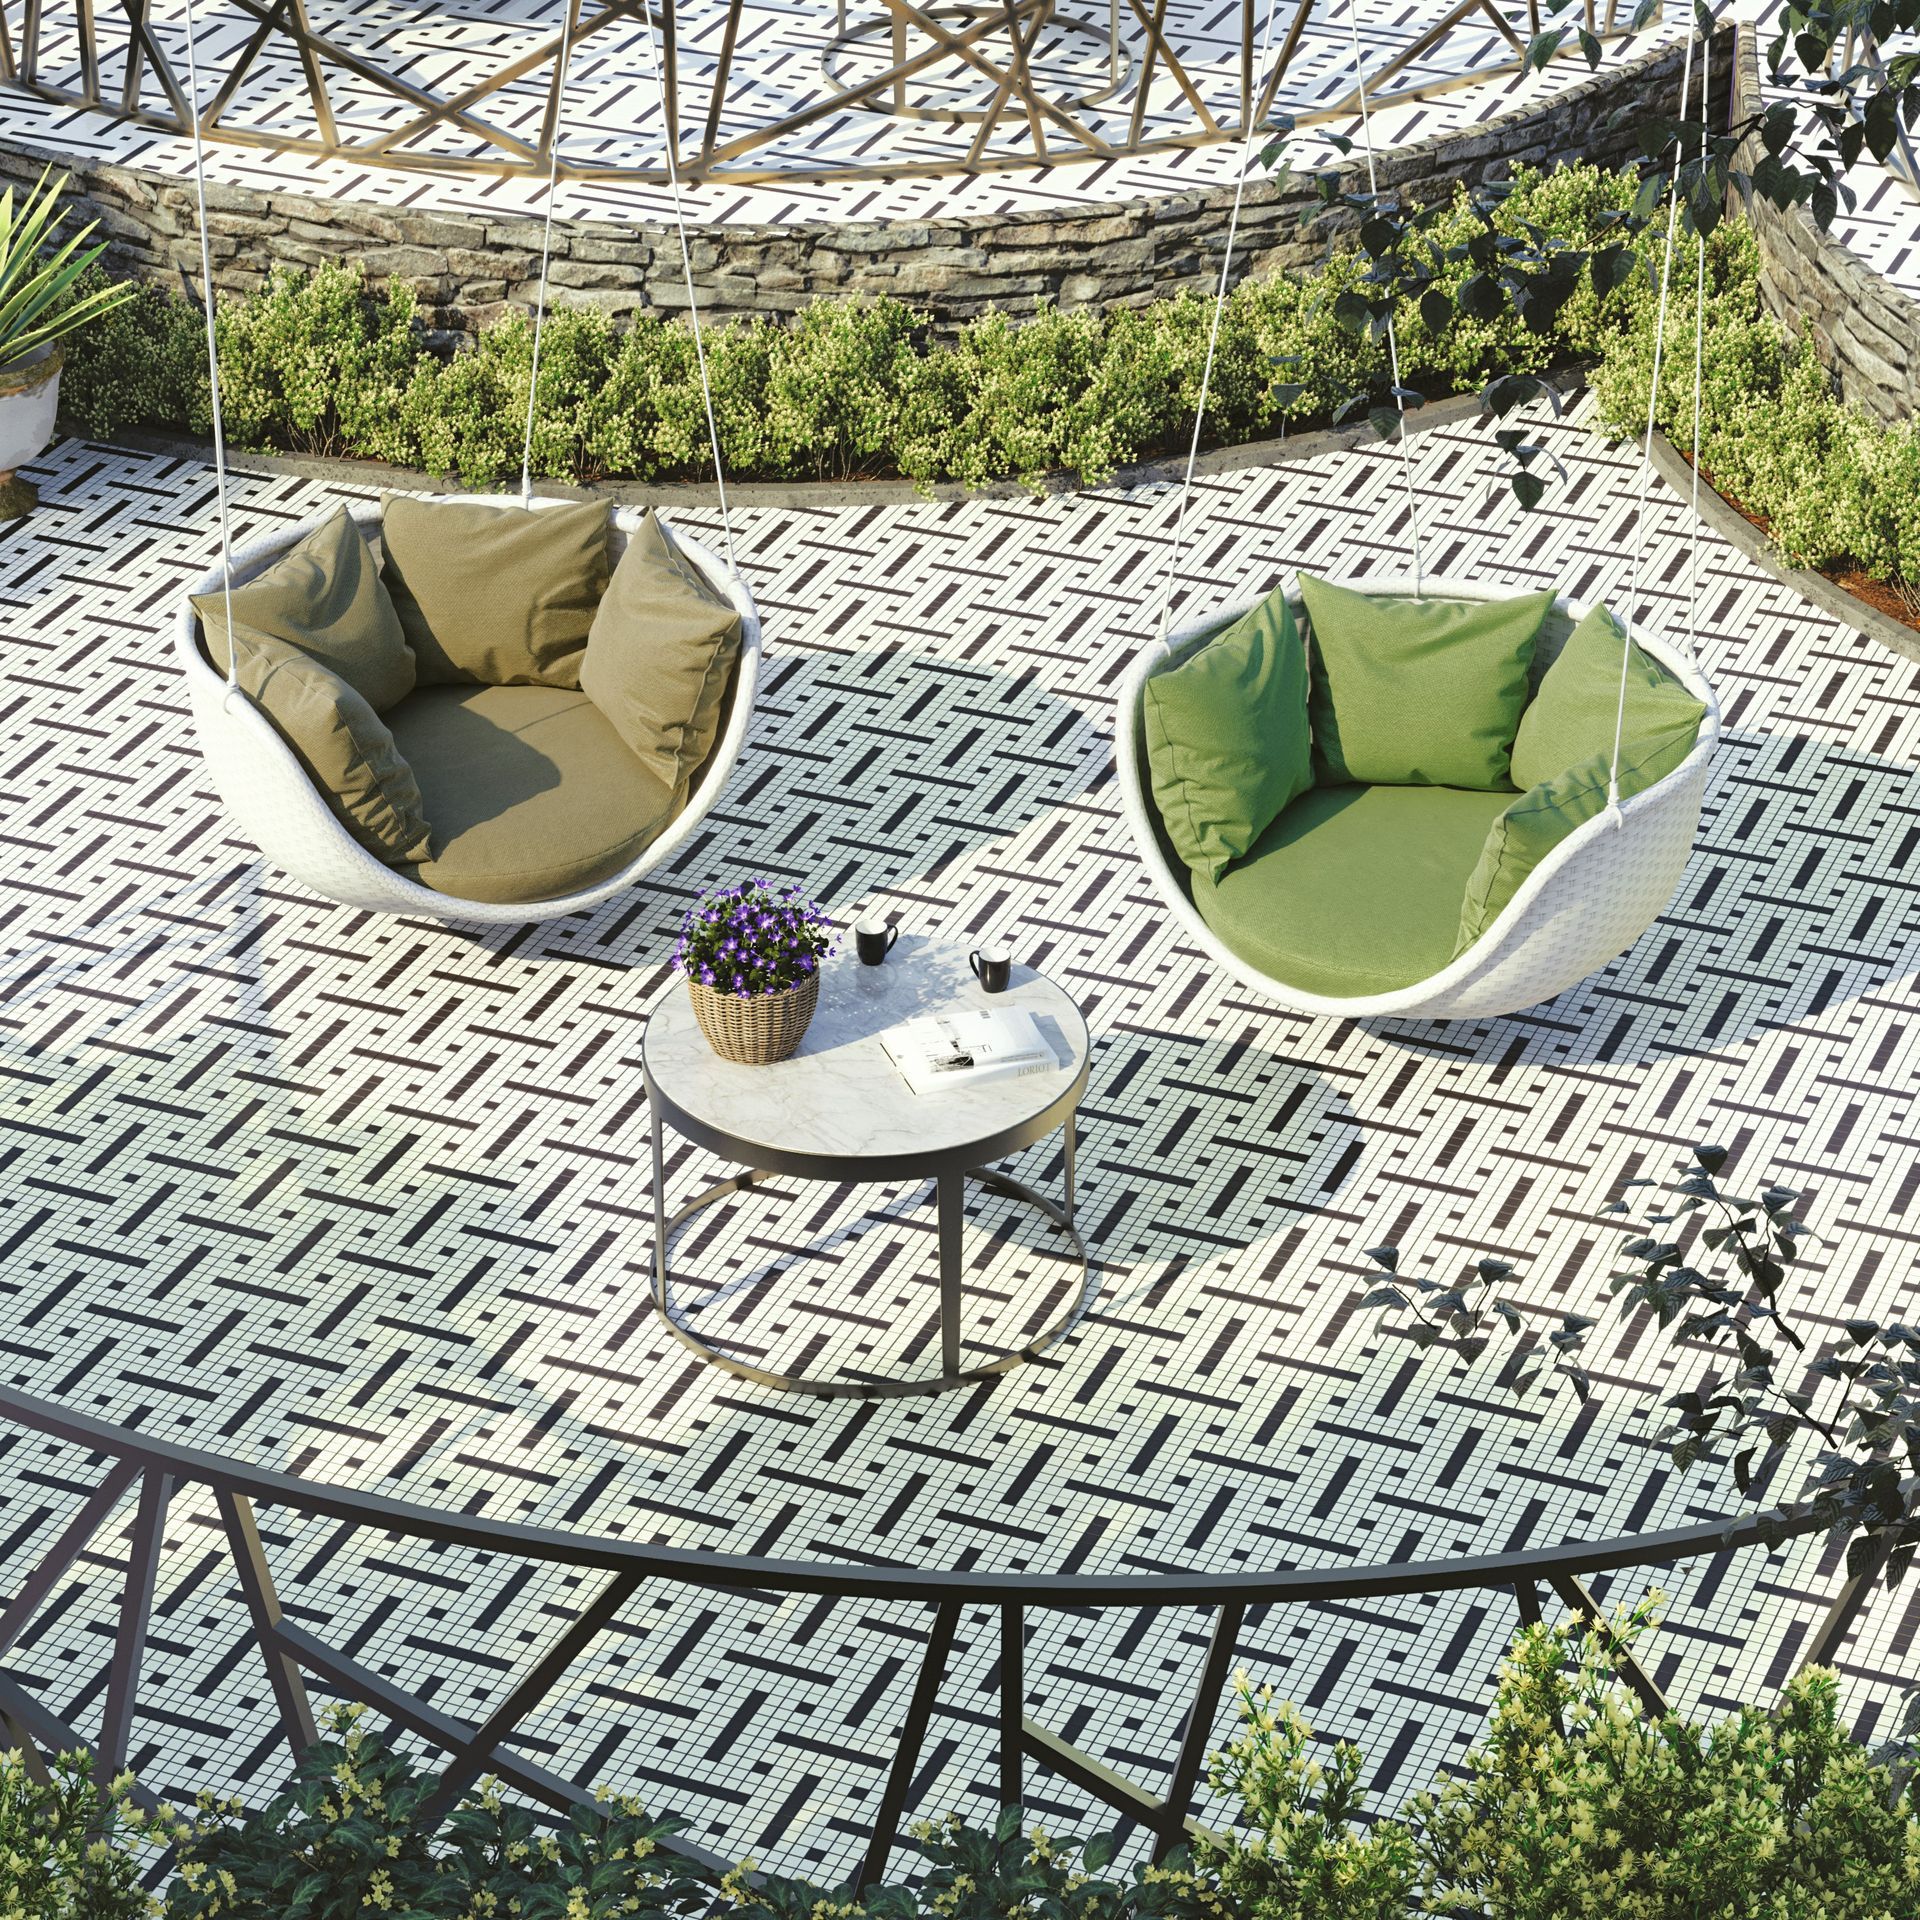 full body solid coloured tiles used in a garden setting with green and white swing seats creating a relaxing atmosphere